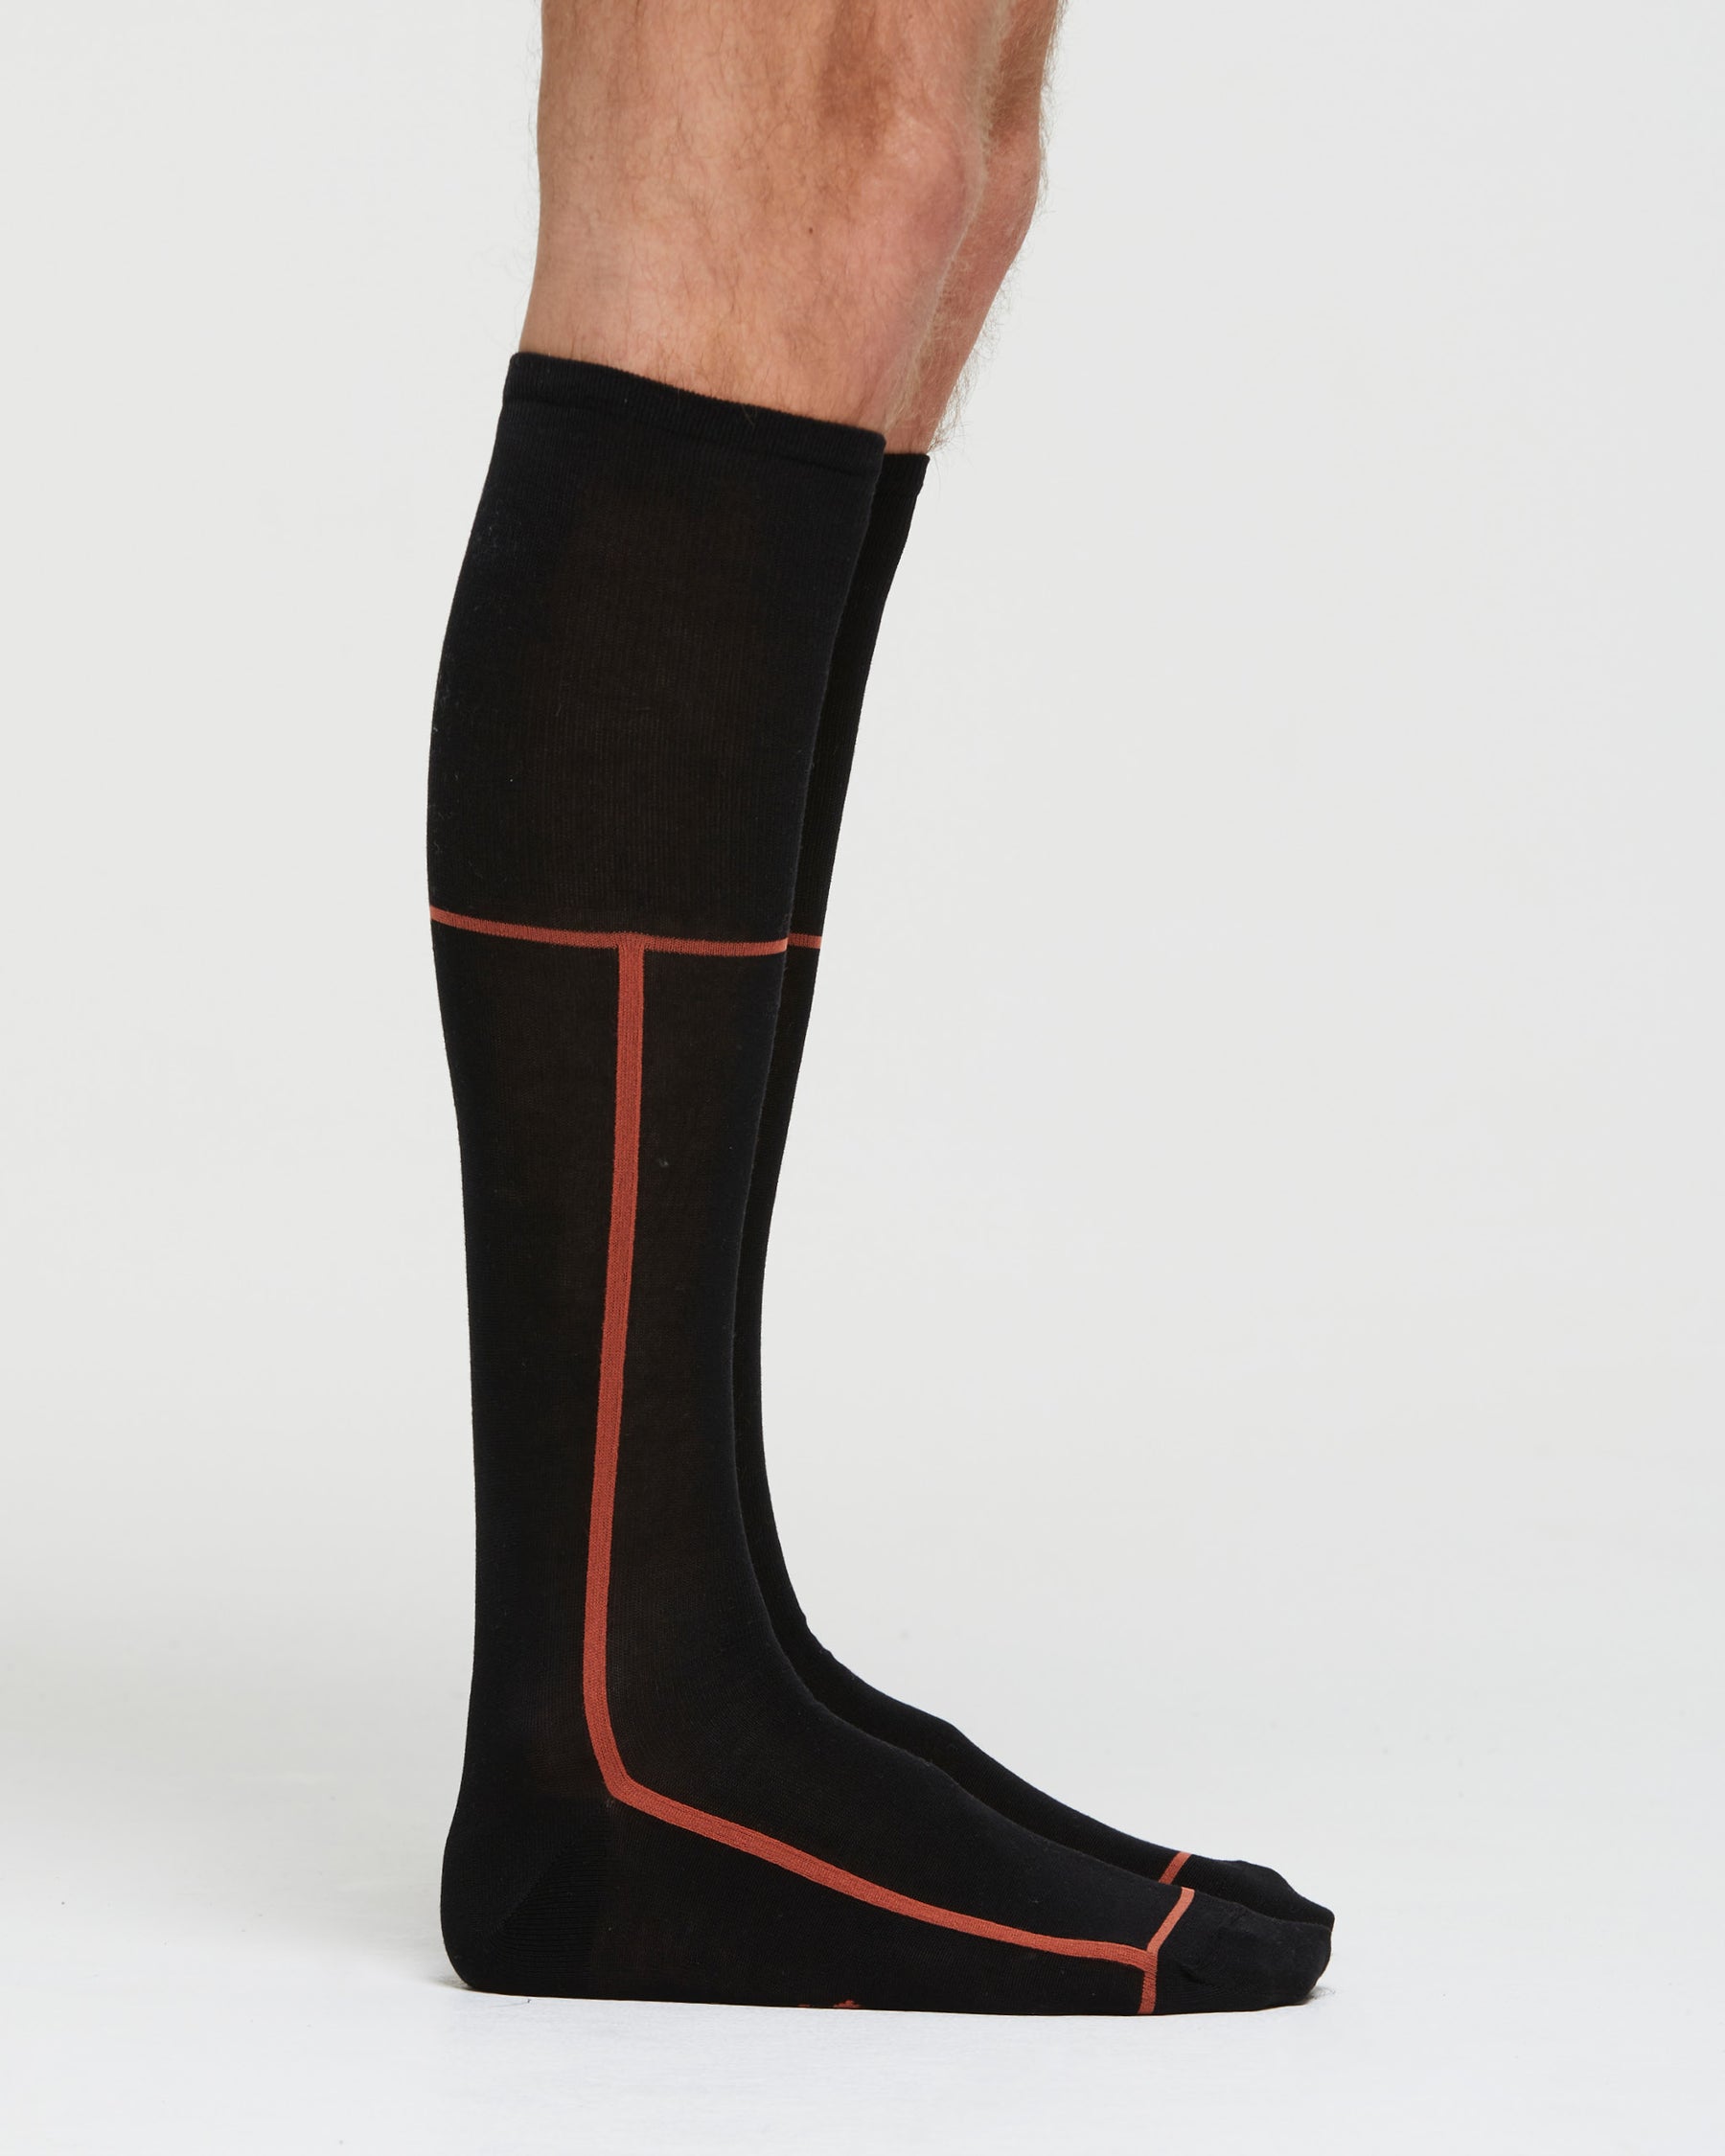 FILIPPO COTTON LONG SOCKS WITH CONTRASTING STRIPE PATTERN